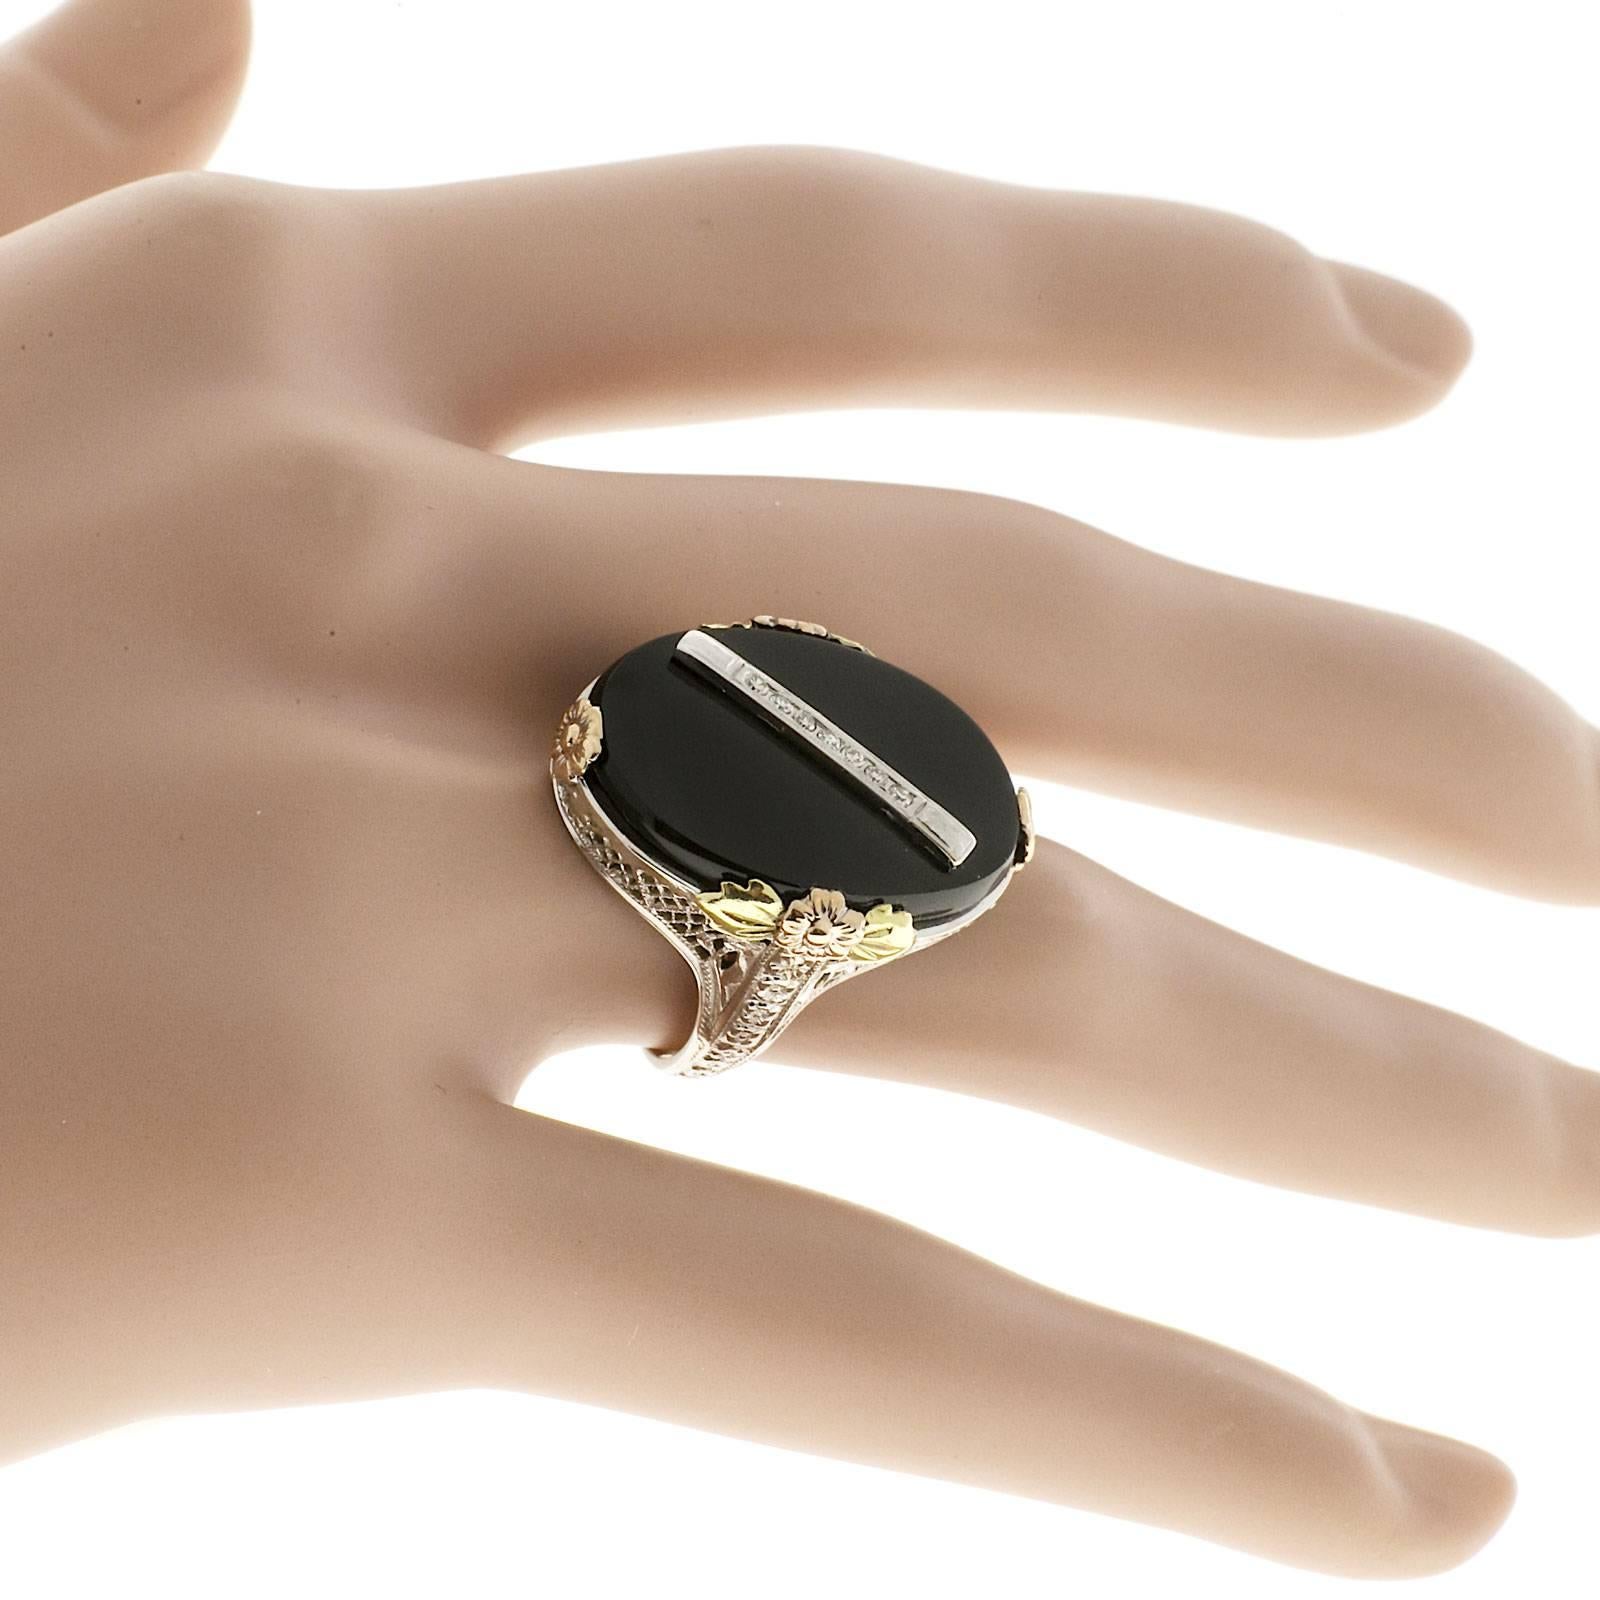 Oval Black Onyx Diamond Filigree Gold Flower Cocktail Ring In Good Condition For Sale In Stamford, CT